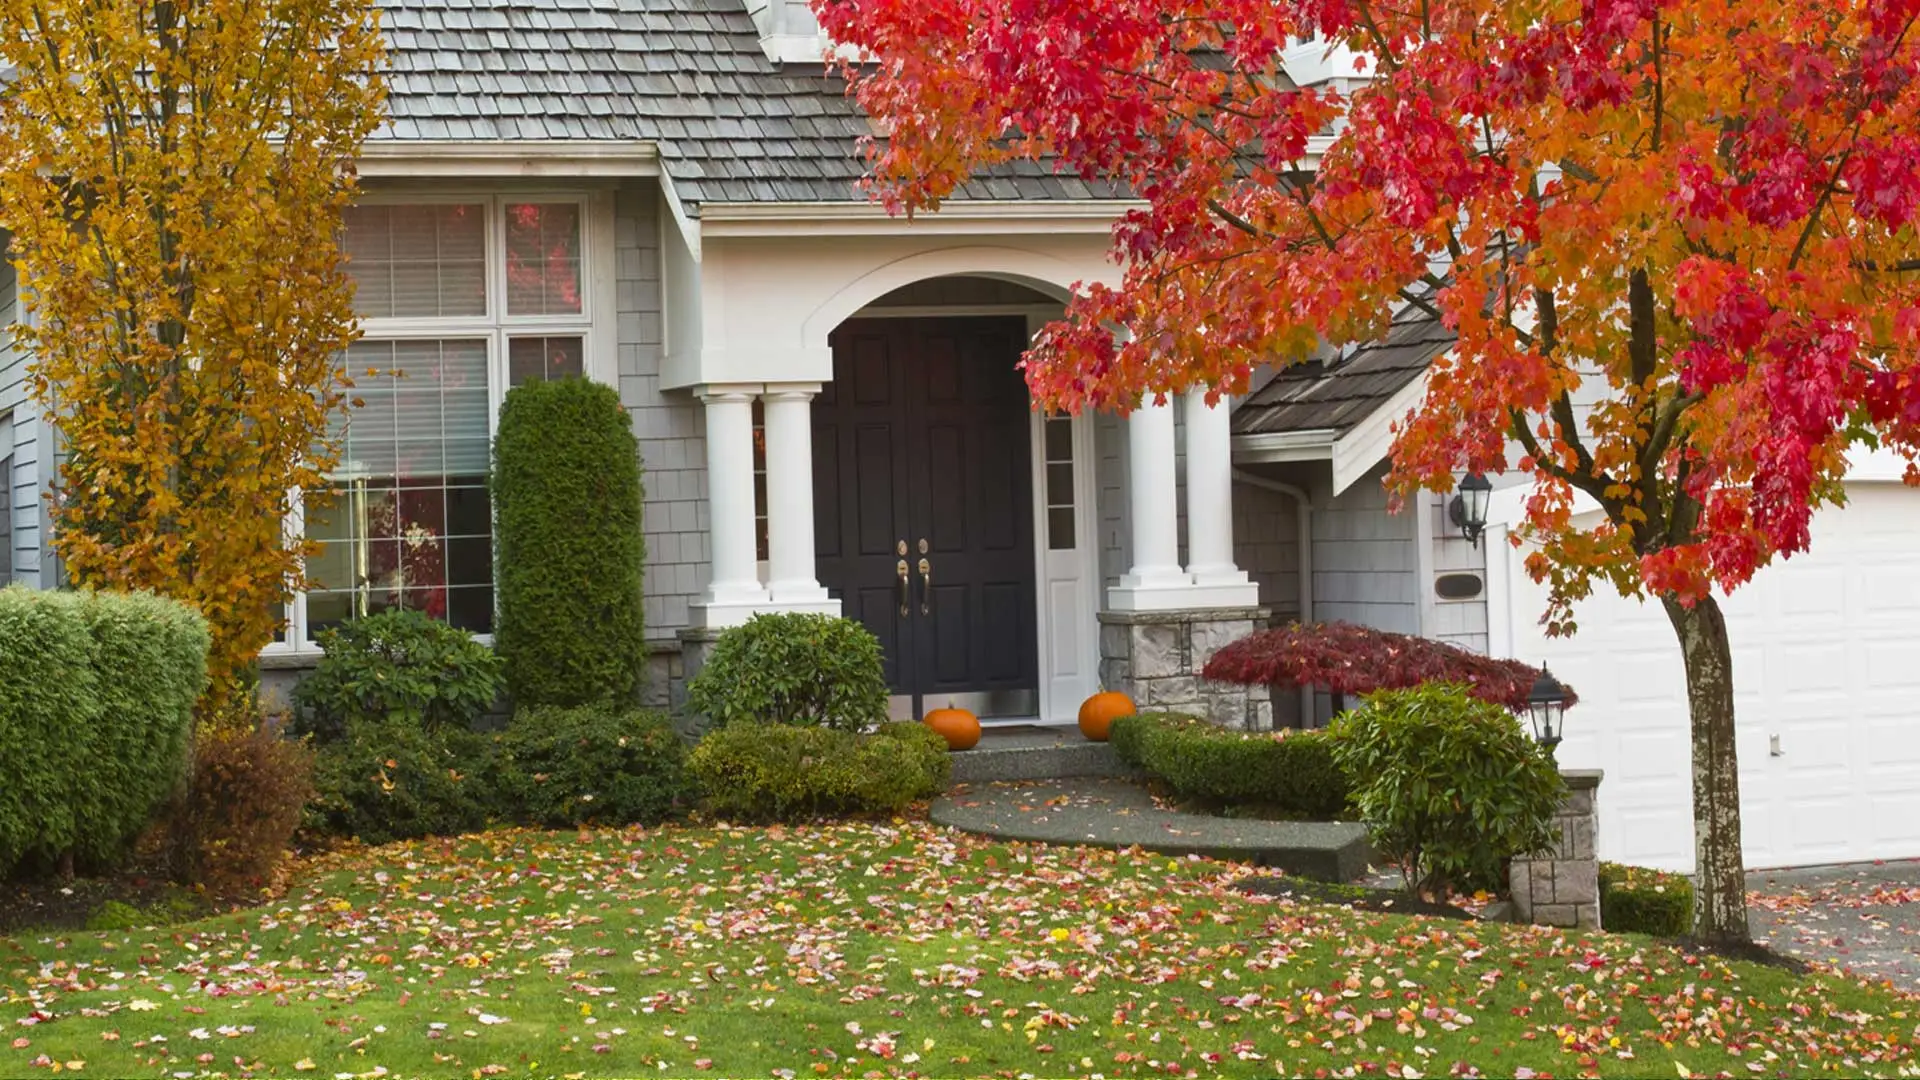 Residential property in Gresham, OR during the fall time in need of fall cleanup services.